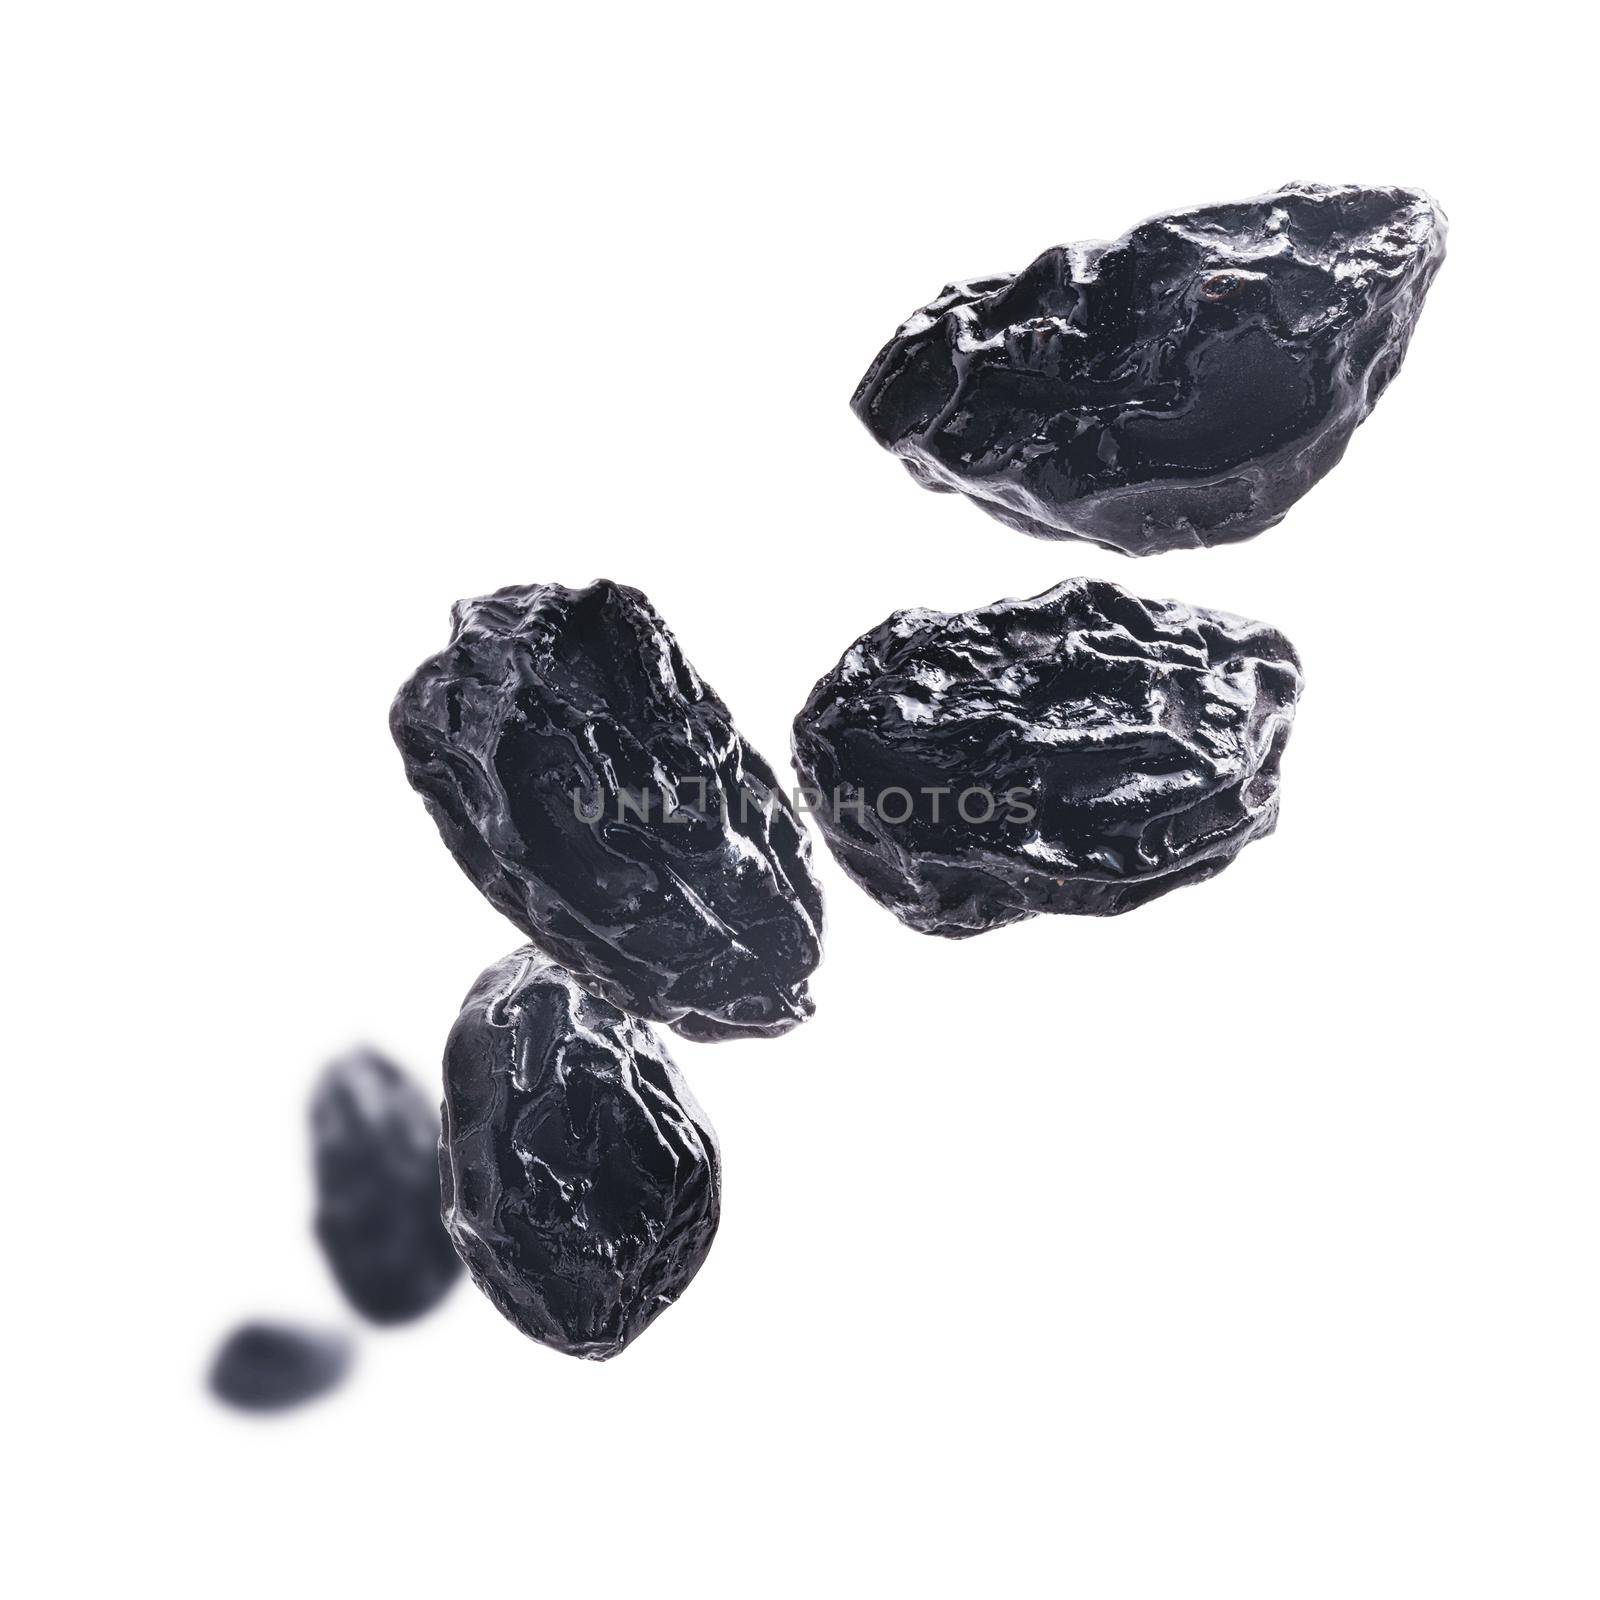 Dried prunes levitate on a white background by butenkow